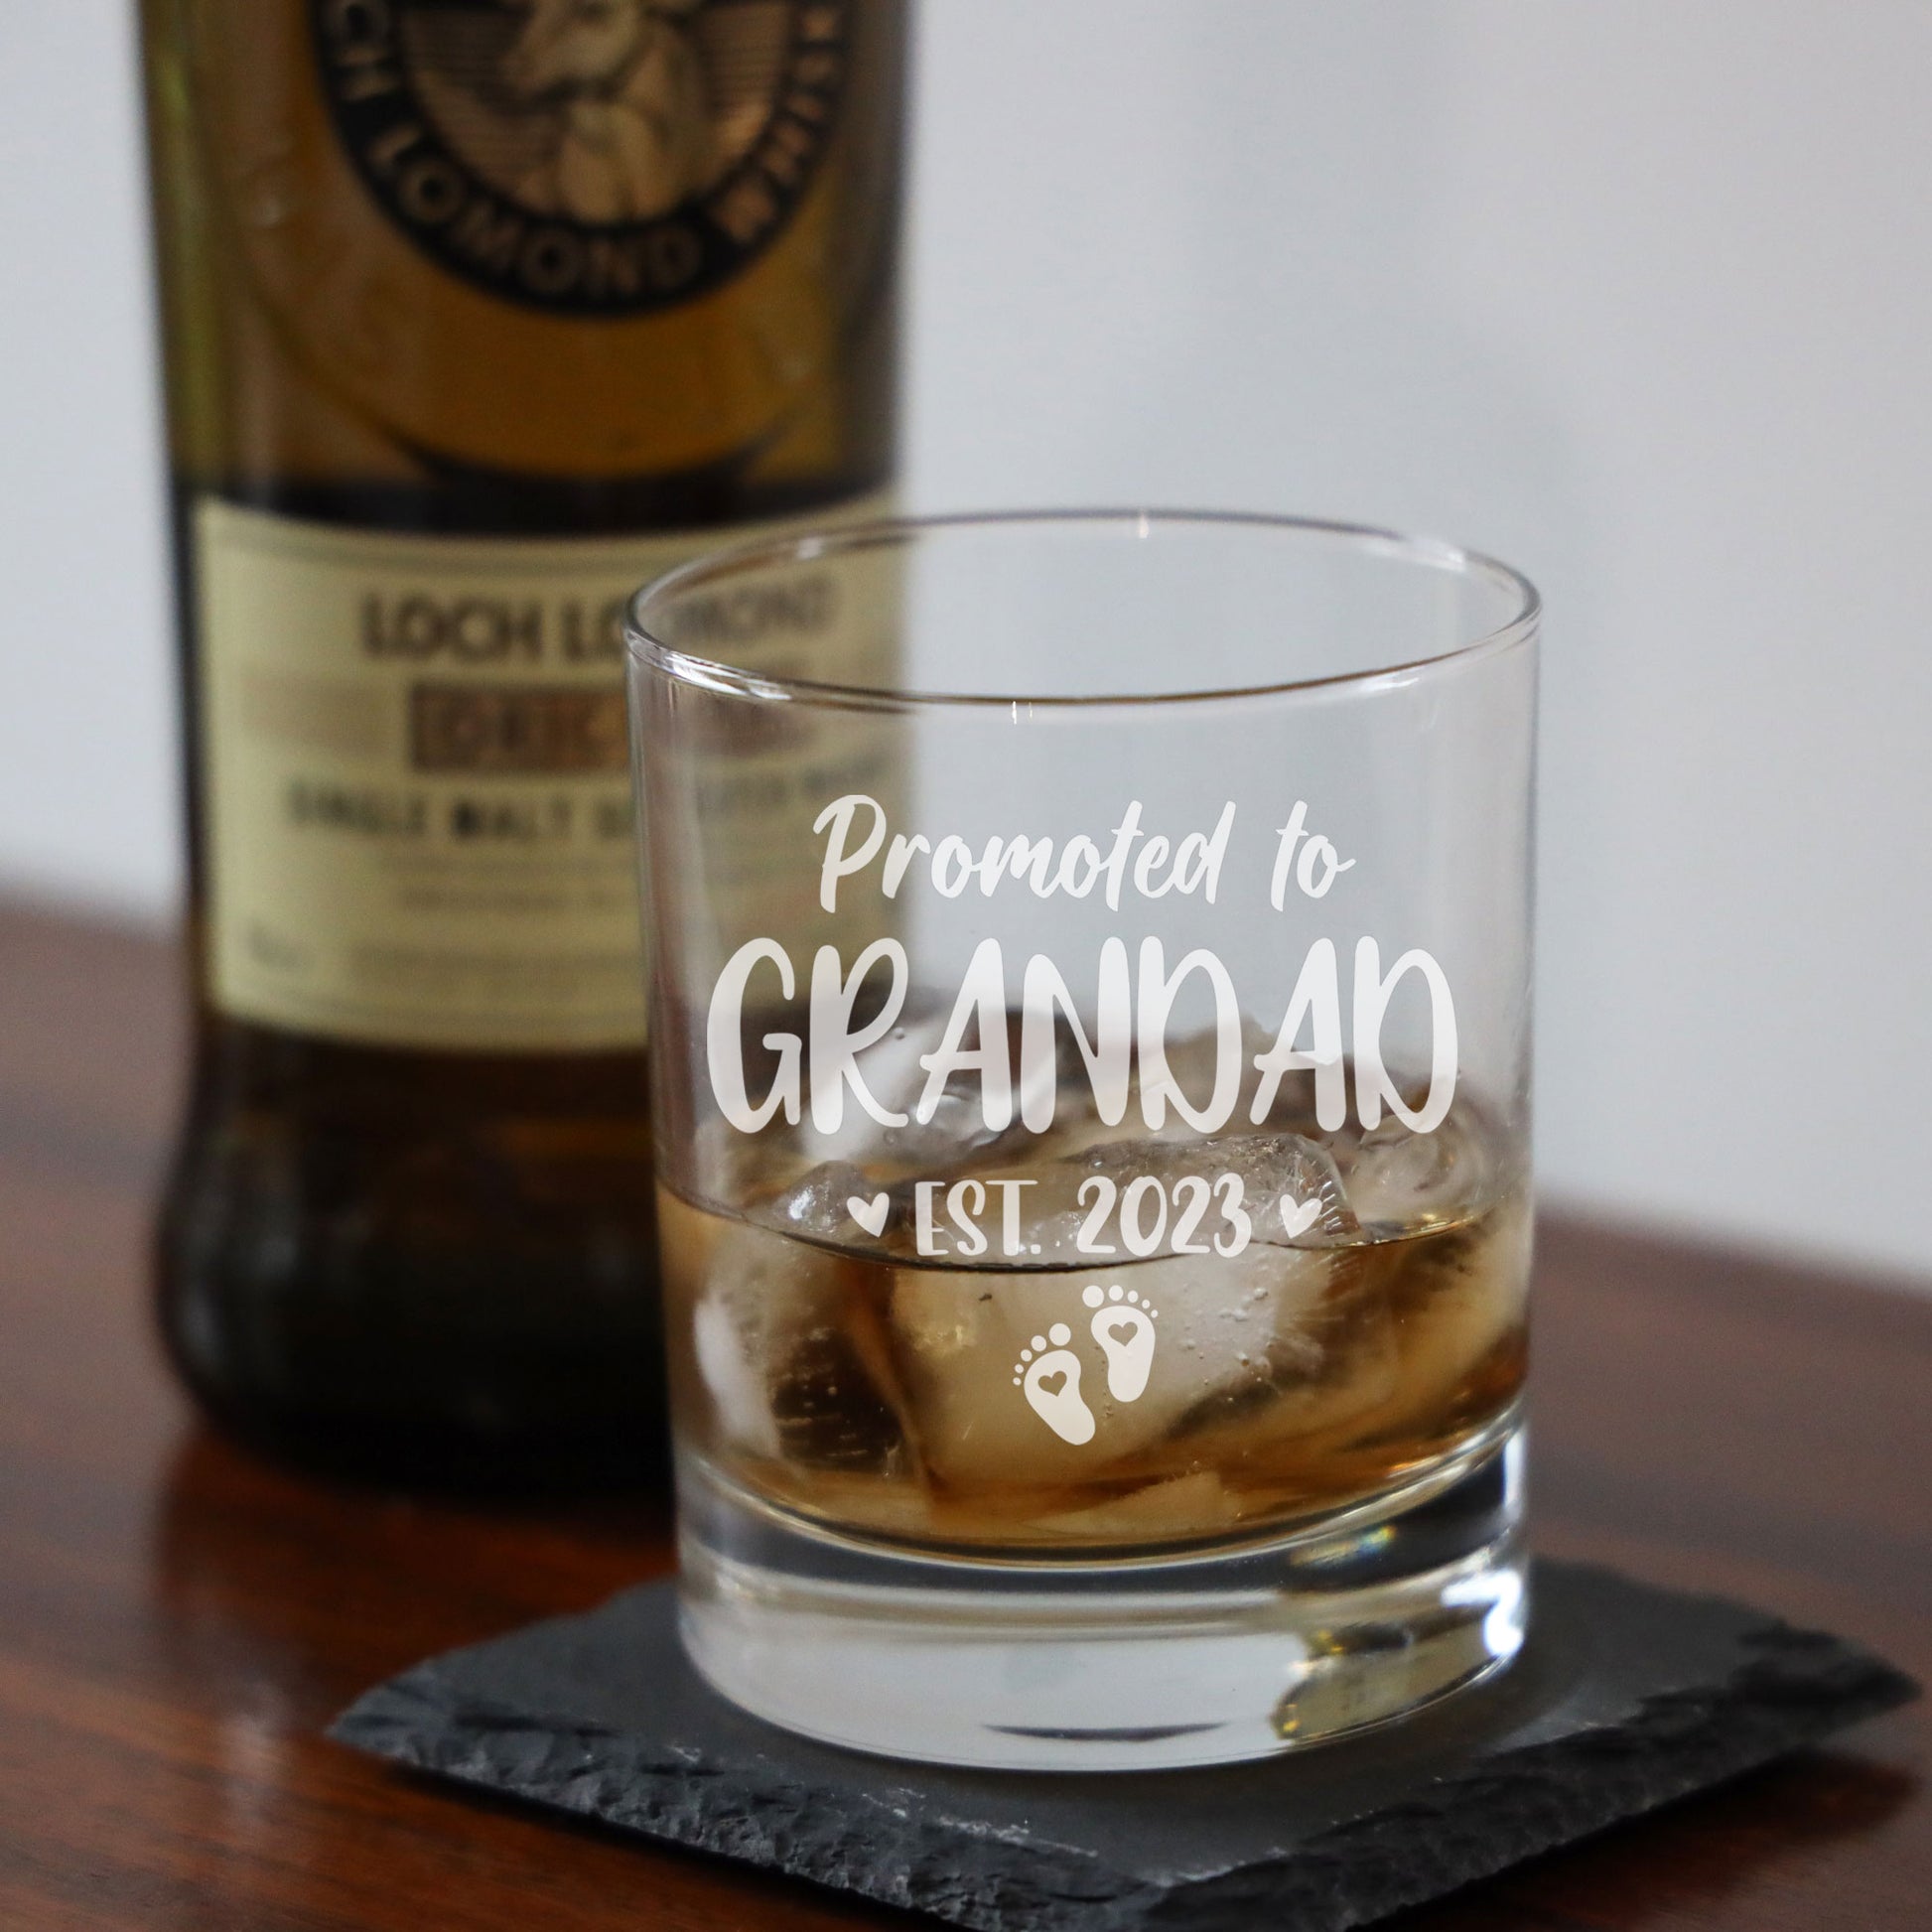 Promoted To Grandad Engraved Whisky Glass  - Always Looking Good -   